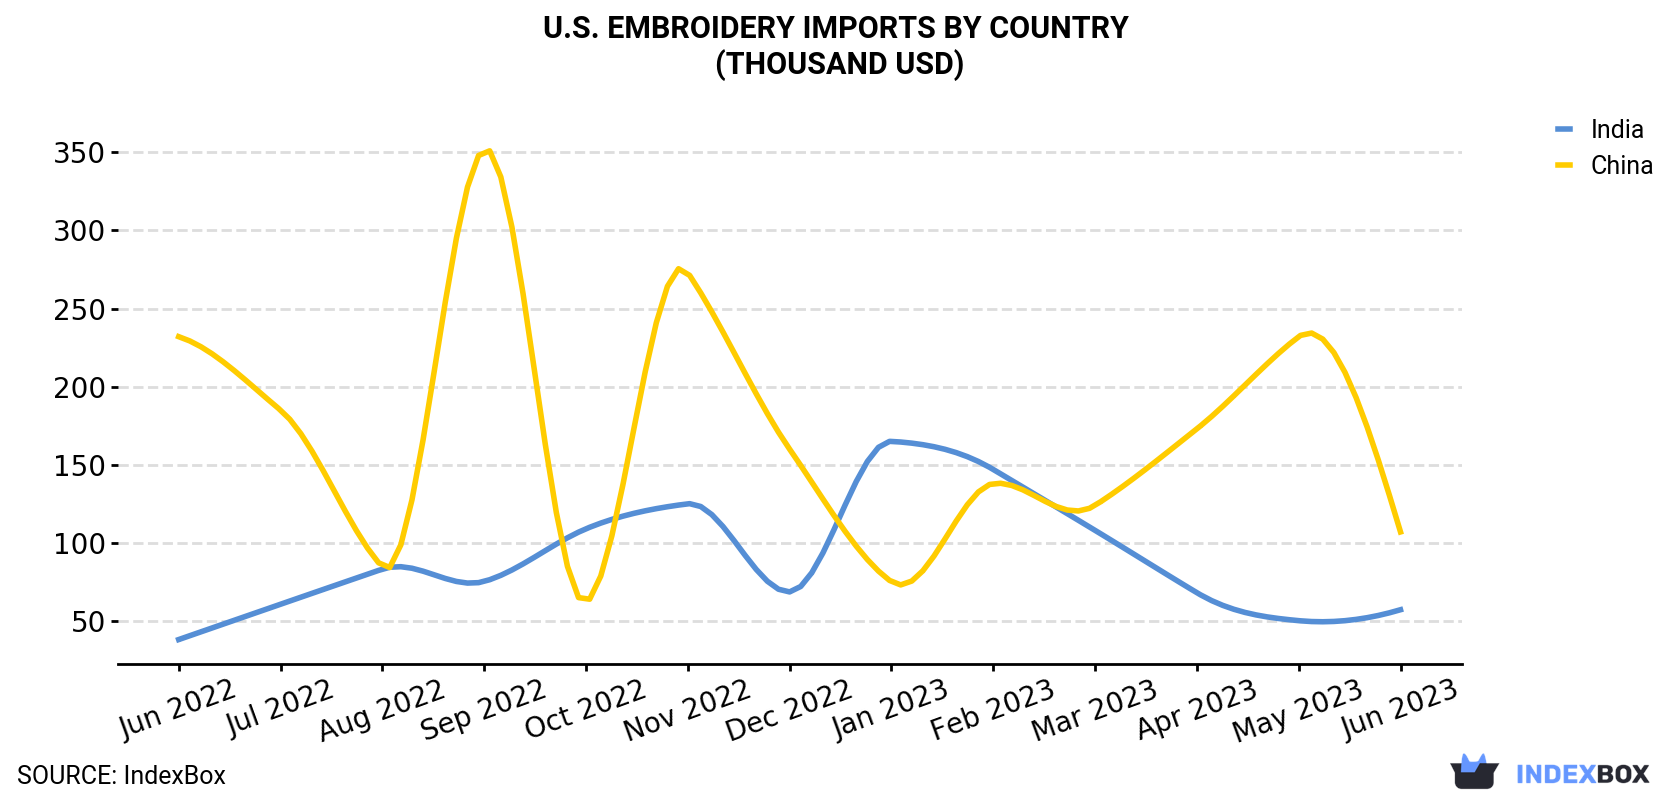 U.S. Embroidery Imports By Country (Thousand USD)